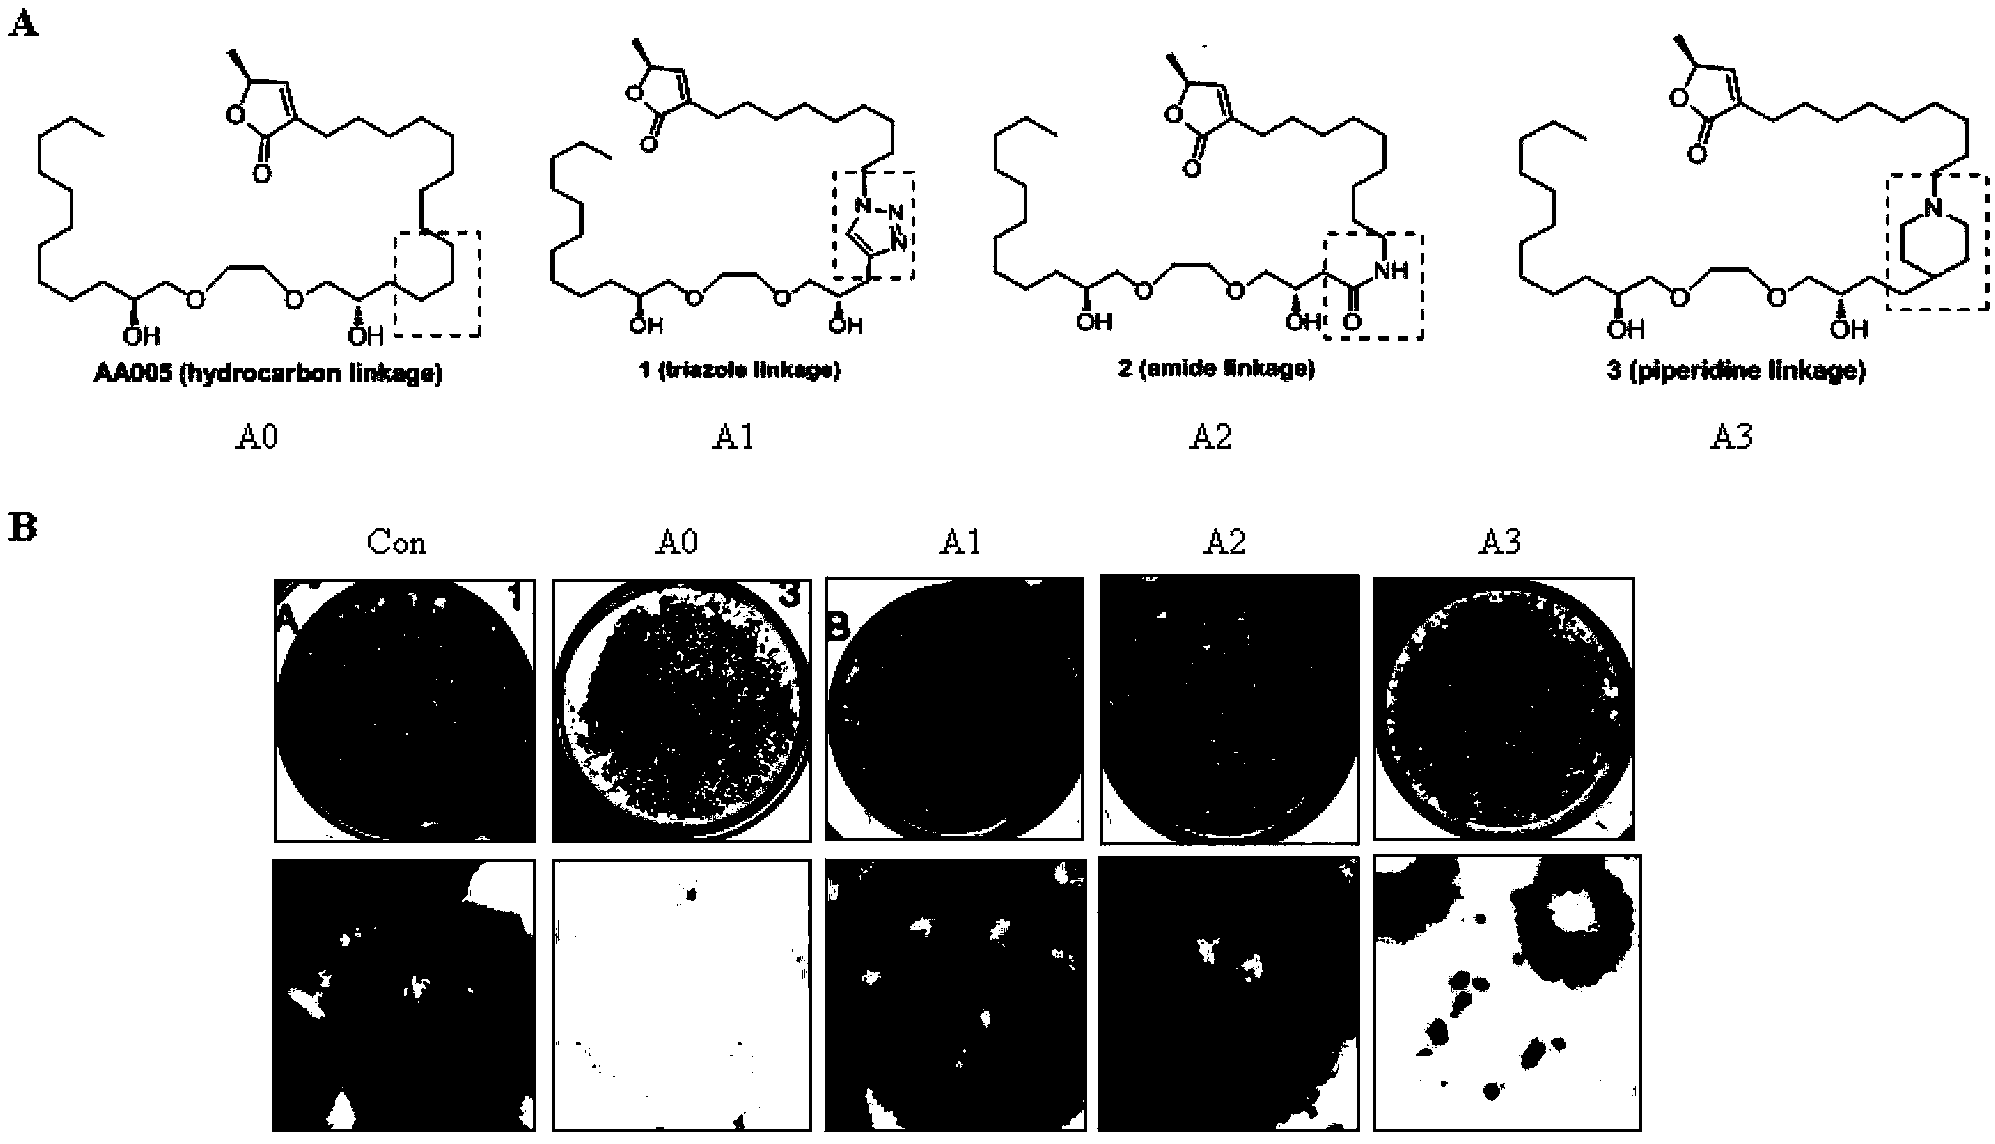 Application of annonaceous acetogenins polyether analog AA005 and structural analogs thereof to pharmacy